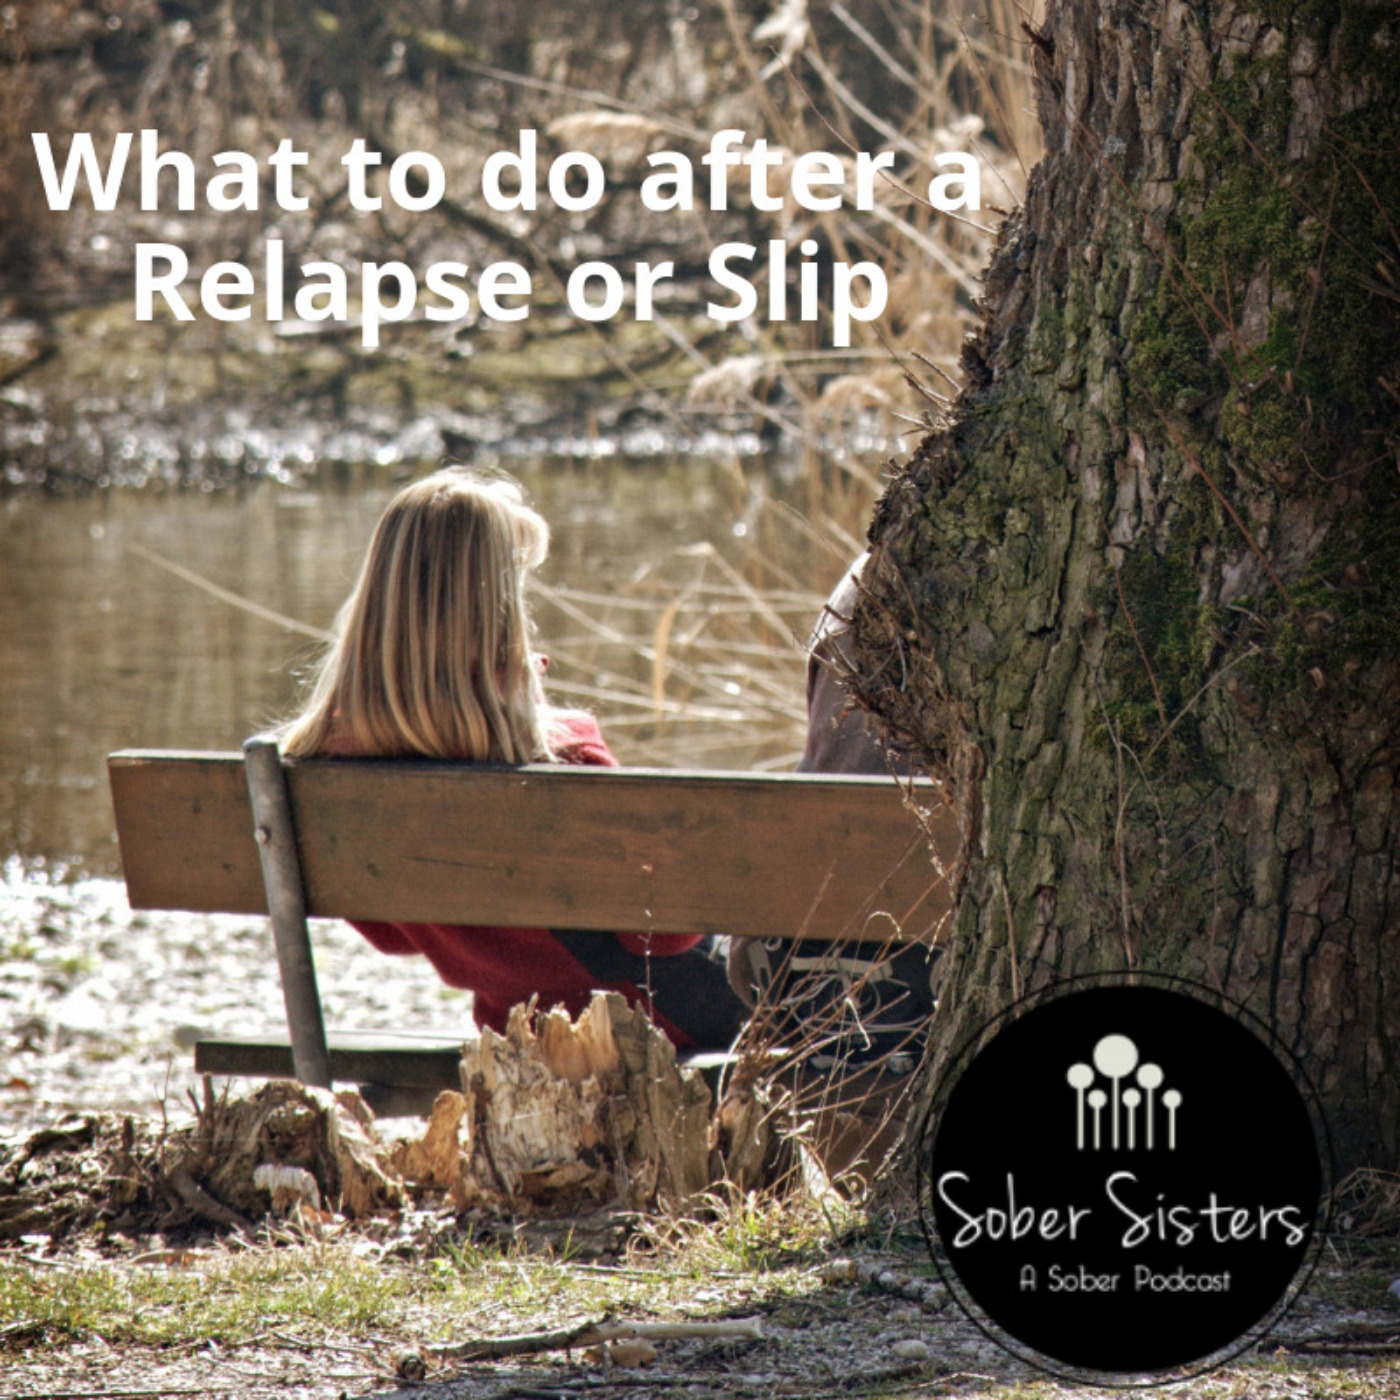 What to do after a Relapse or Slip